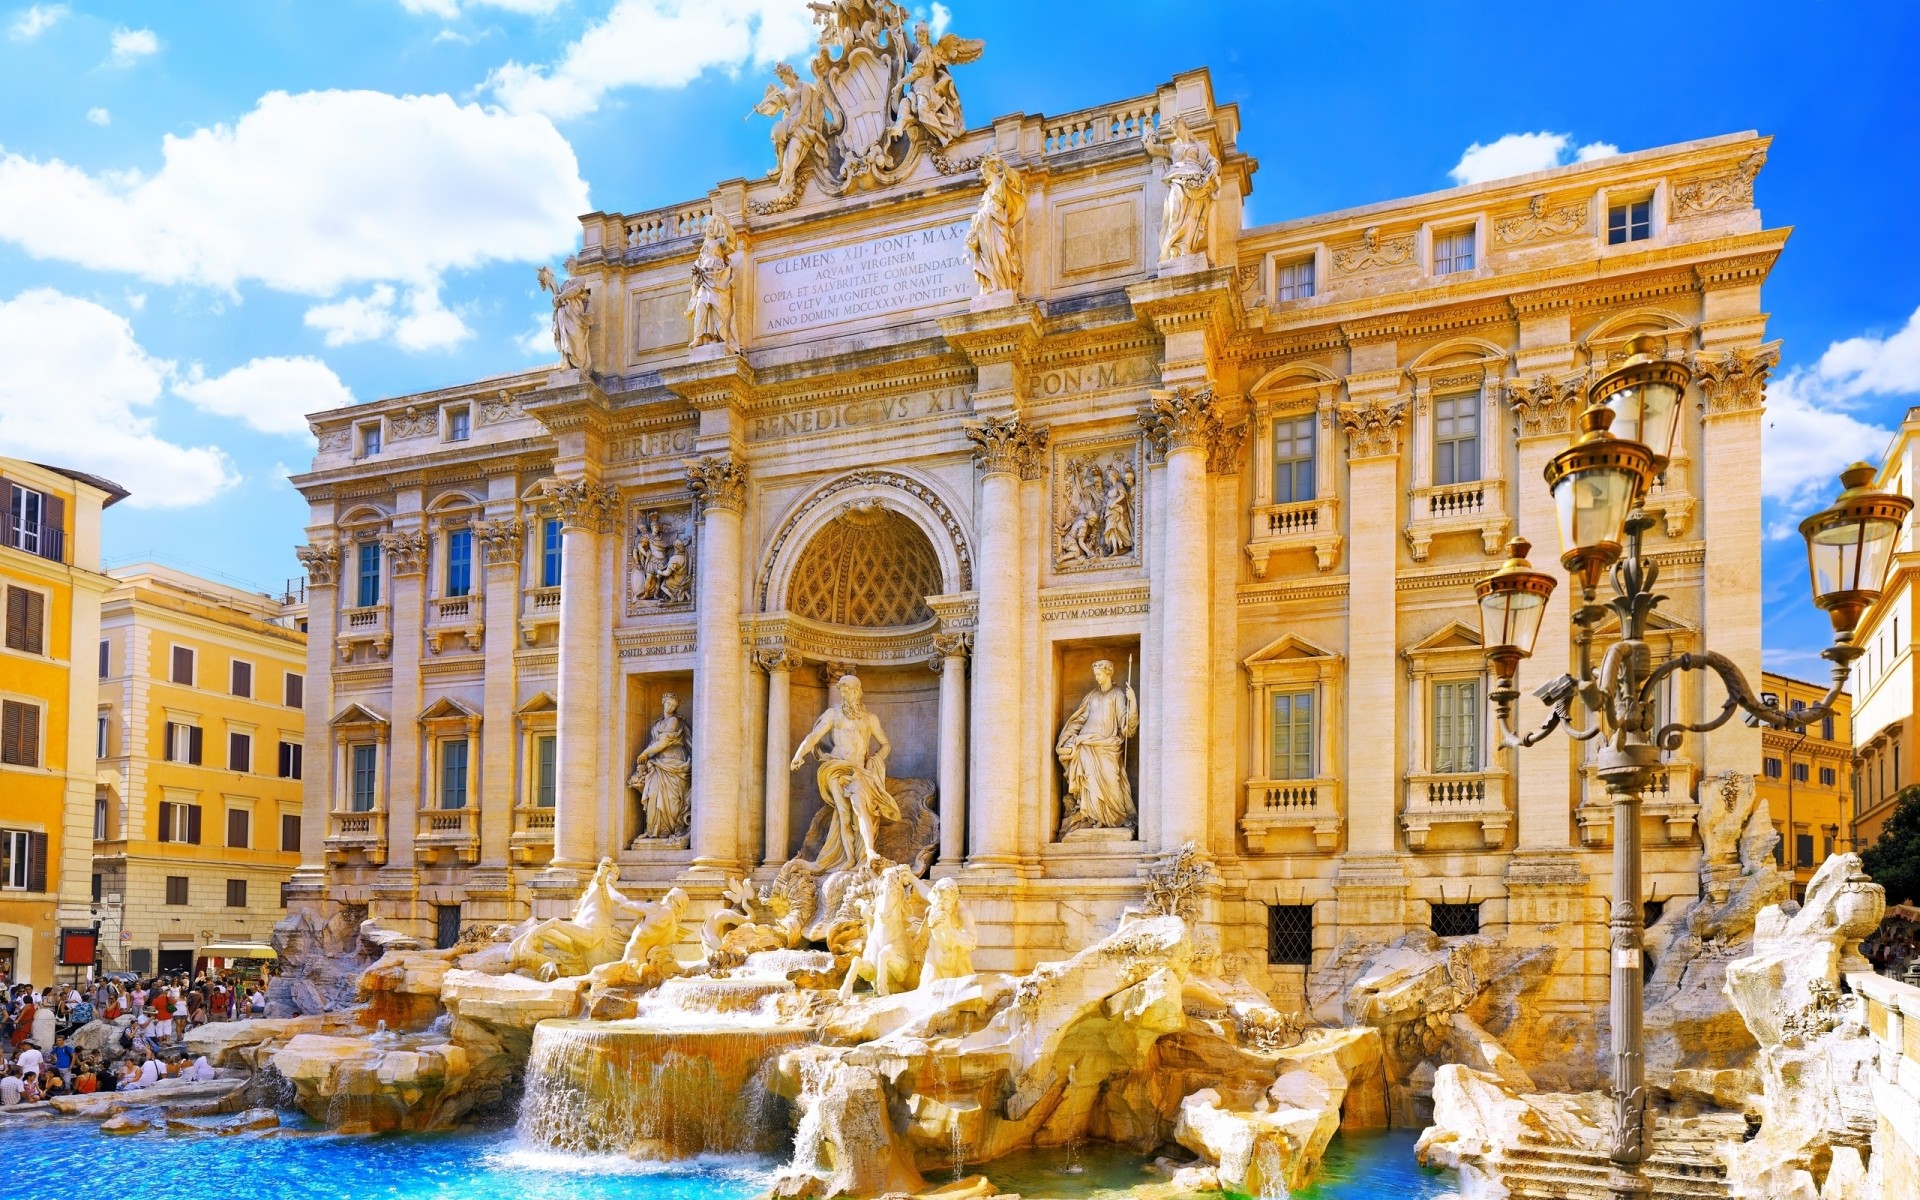 italy architecture travel city building fountain landmark tourism famous statue sculpture culture ancient sky old monument sightseeing art destination historic urban pics picture photo image